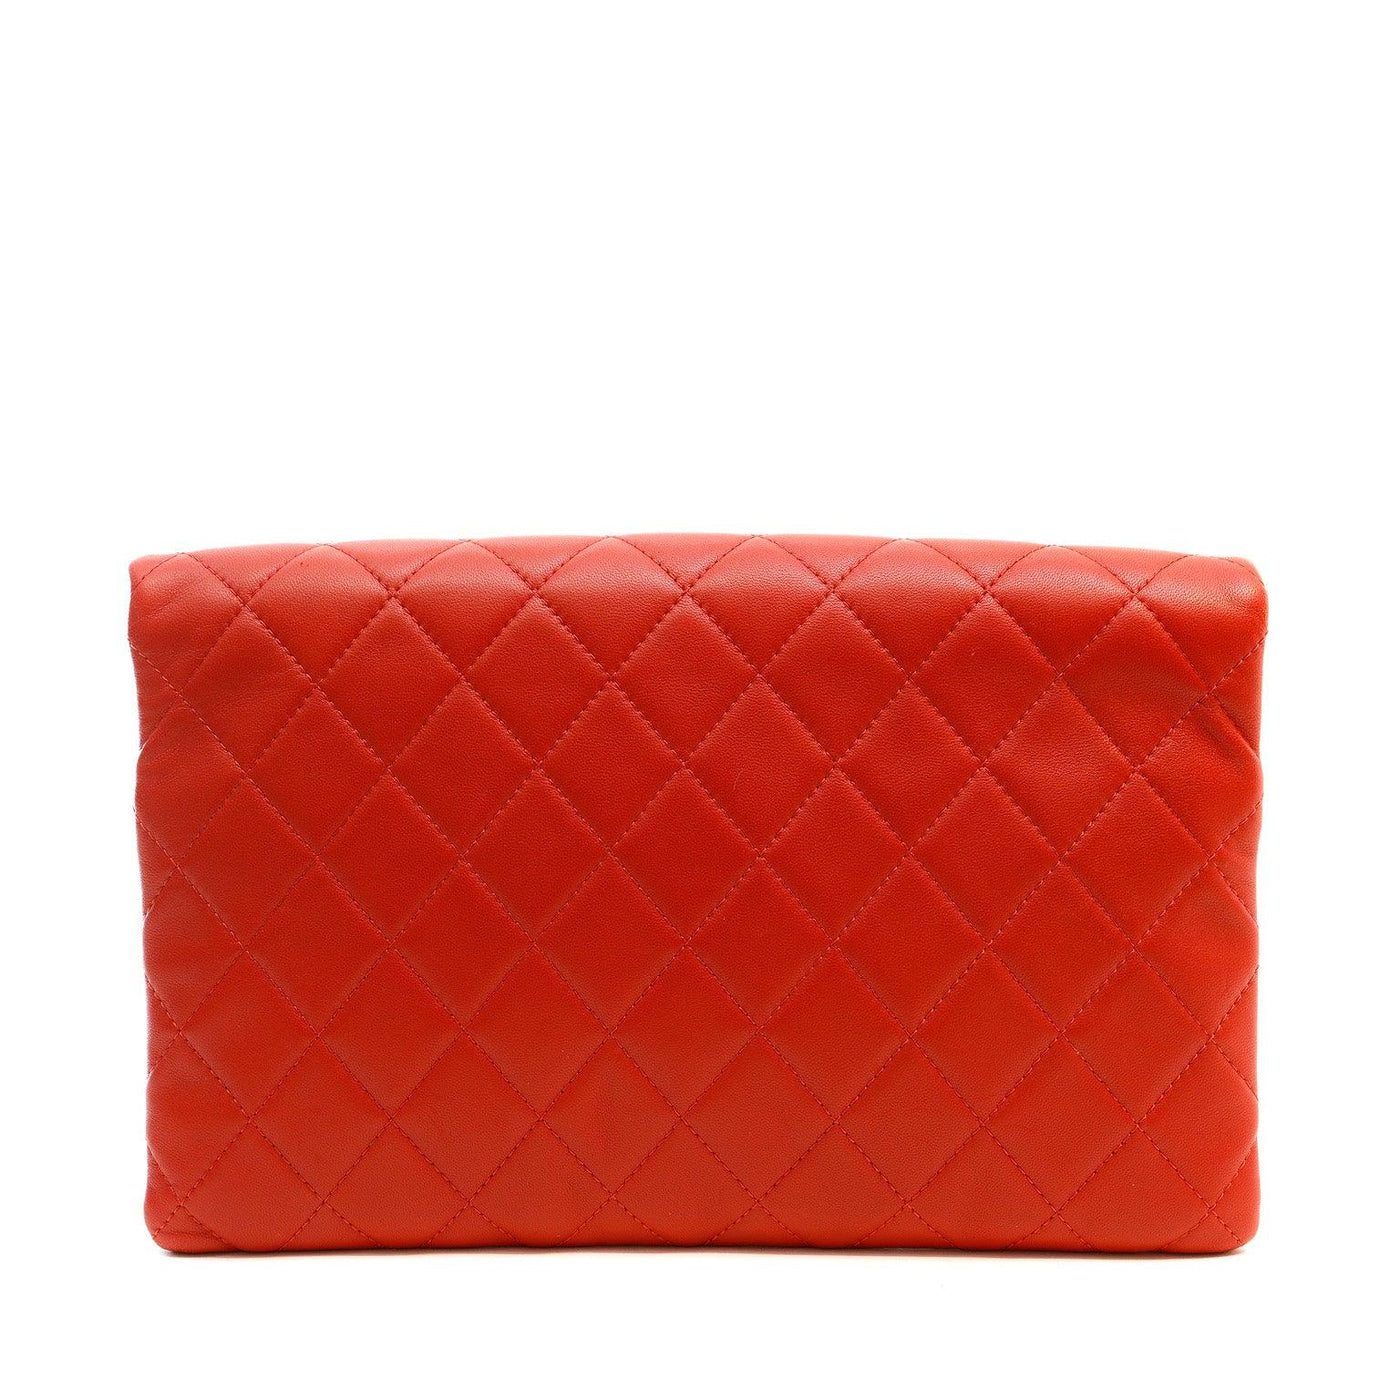 Chanel Red Quilted Lambskin Foldover Clutch - Only Authentics